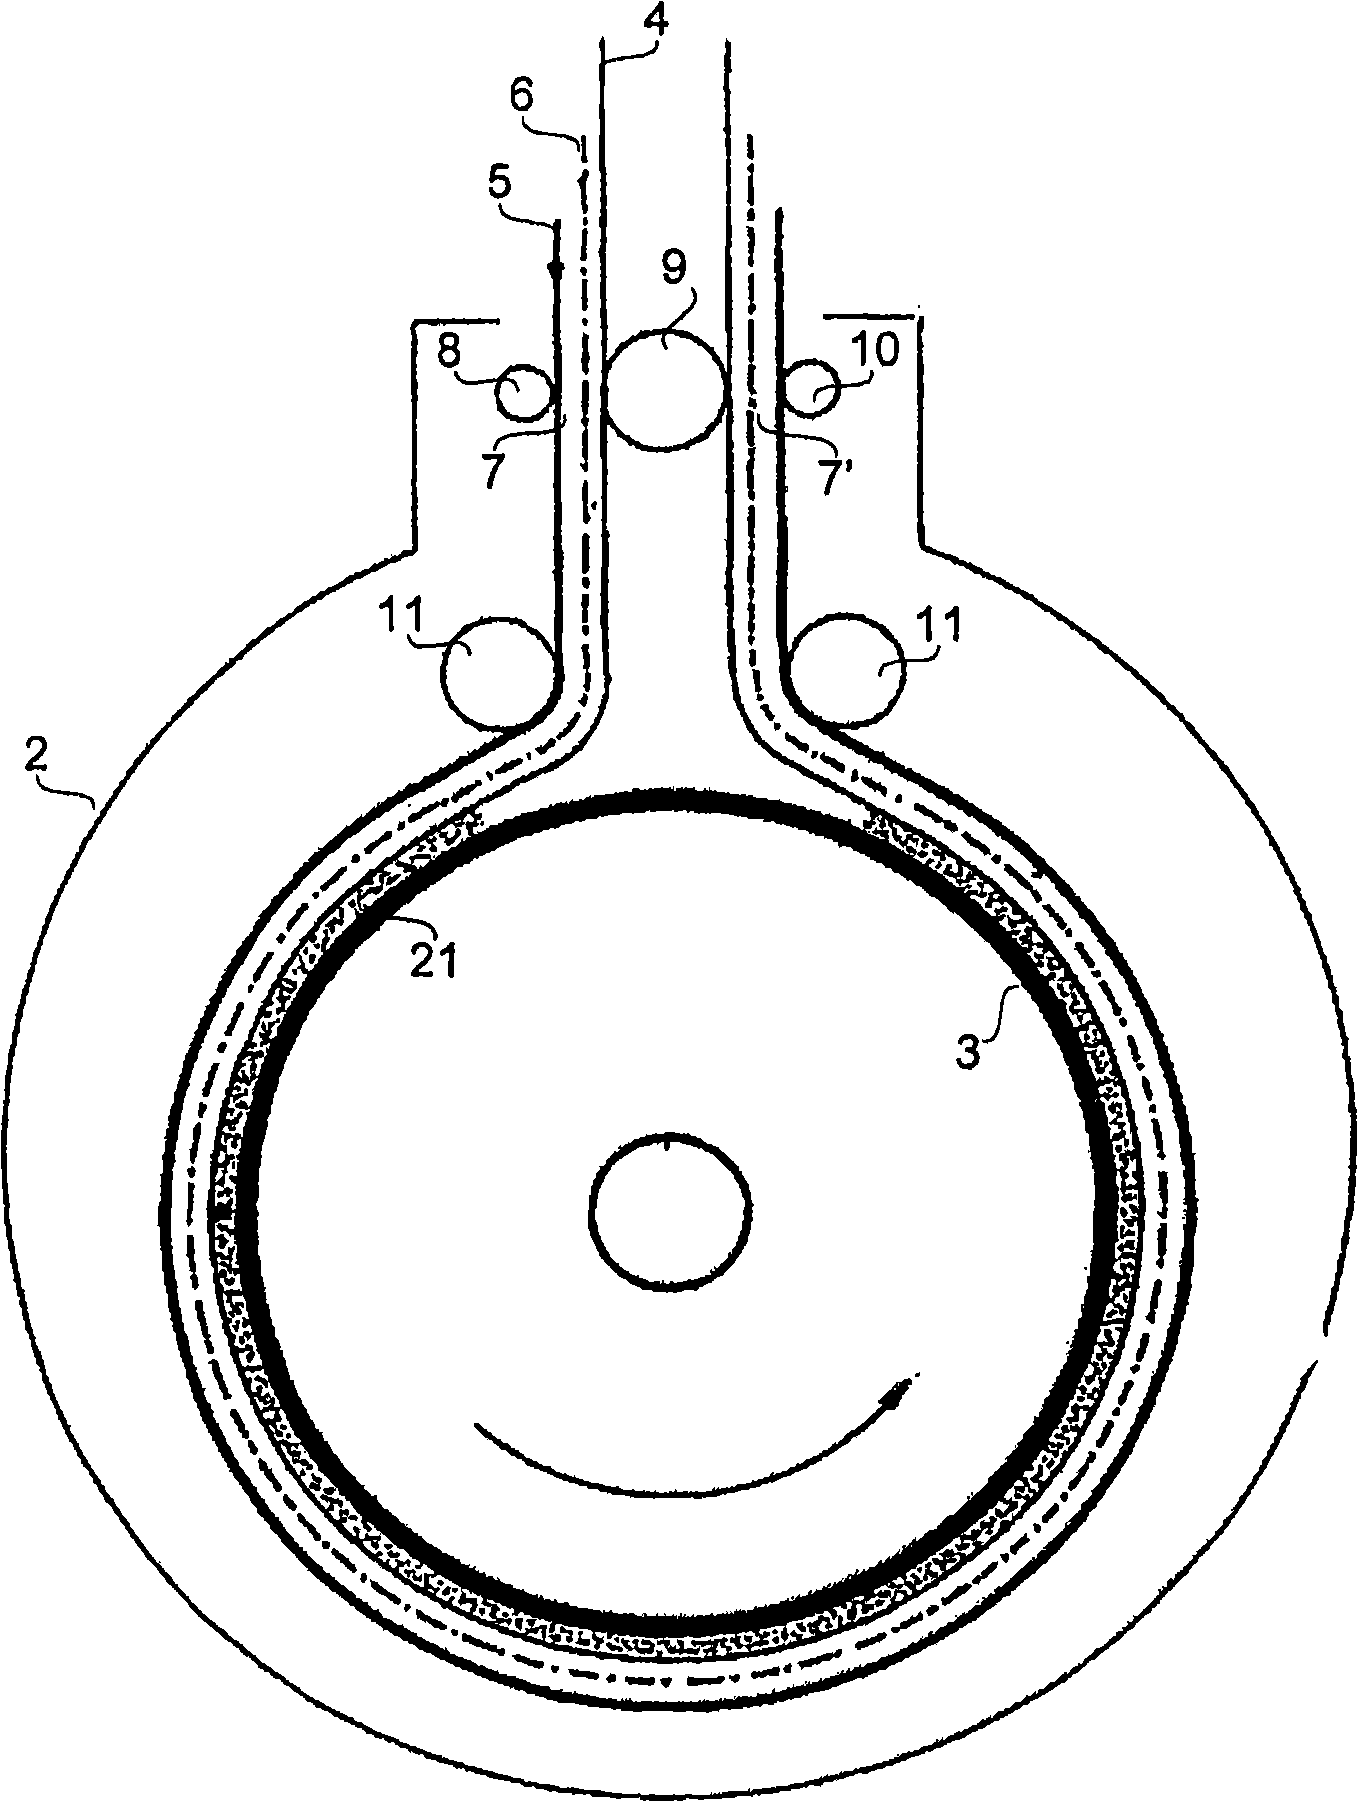 Apparatus for continuous decatizing in autoclave